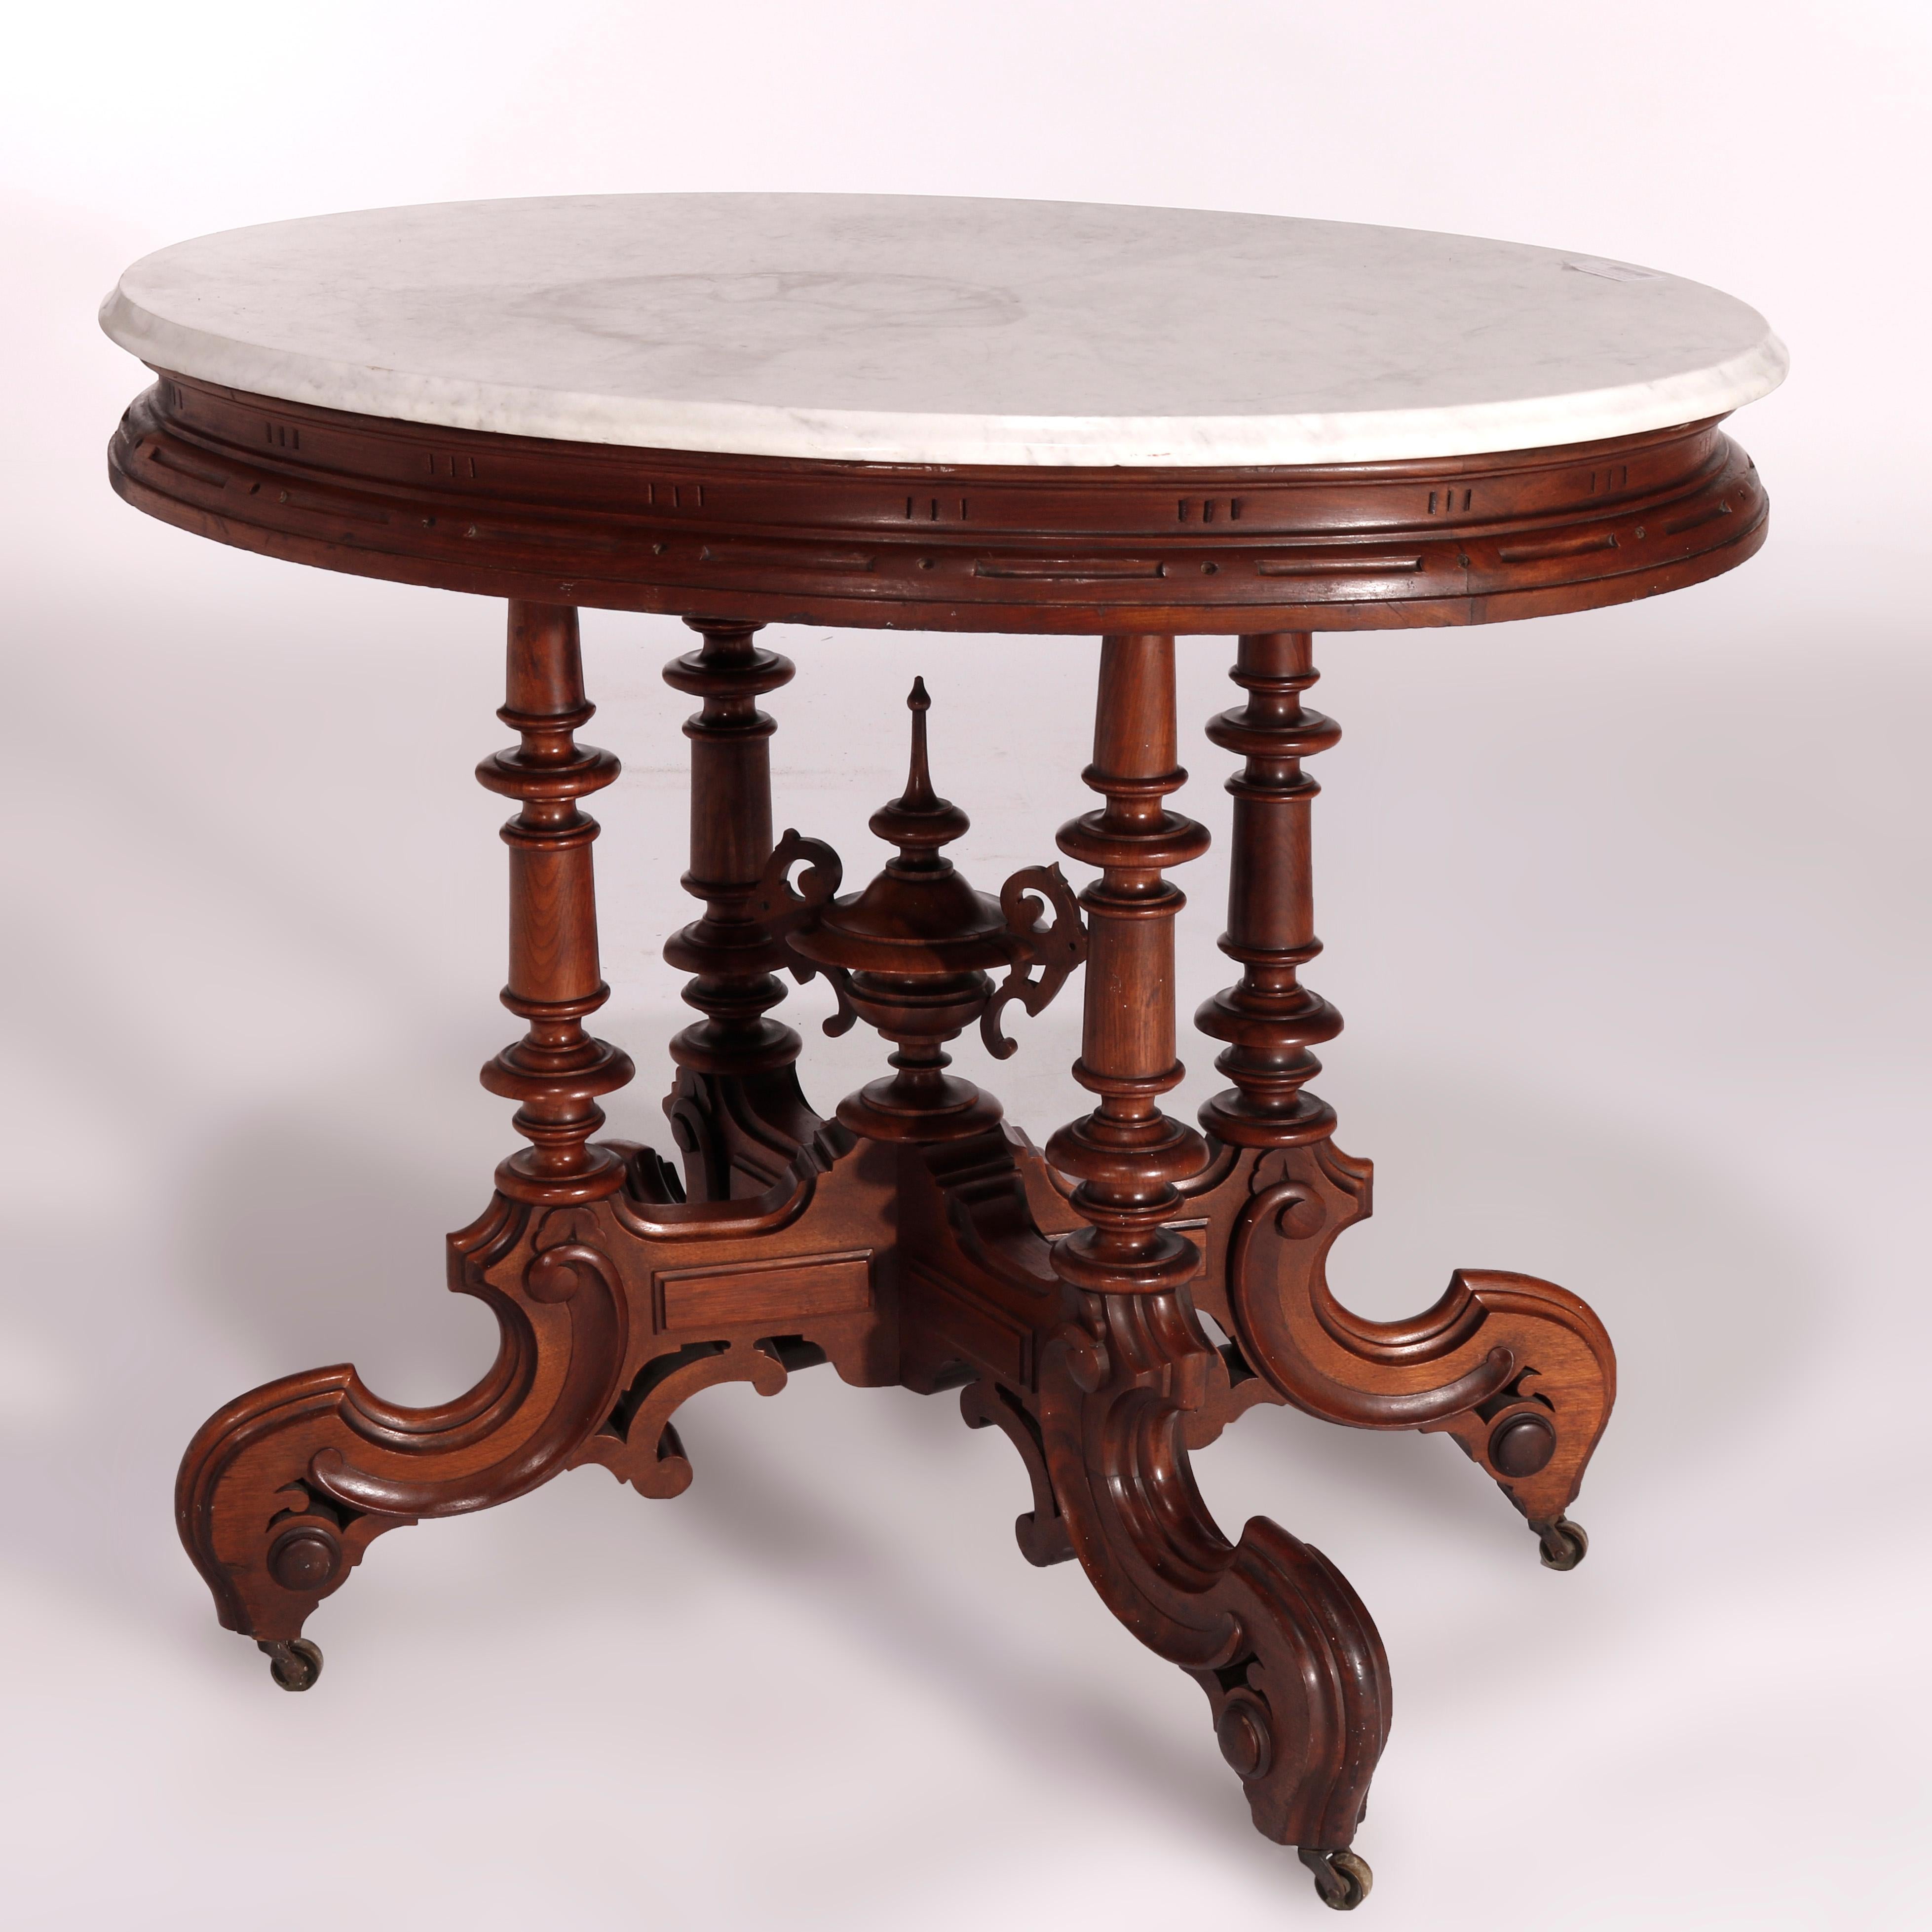 Renaissance Revival Antique Victorian Brooks Brothers Walnut & Marble Parlor Table, circa 1890 For Sale